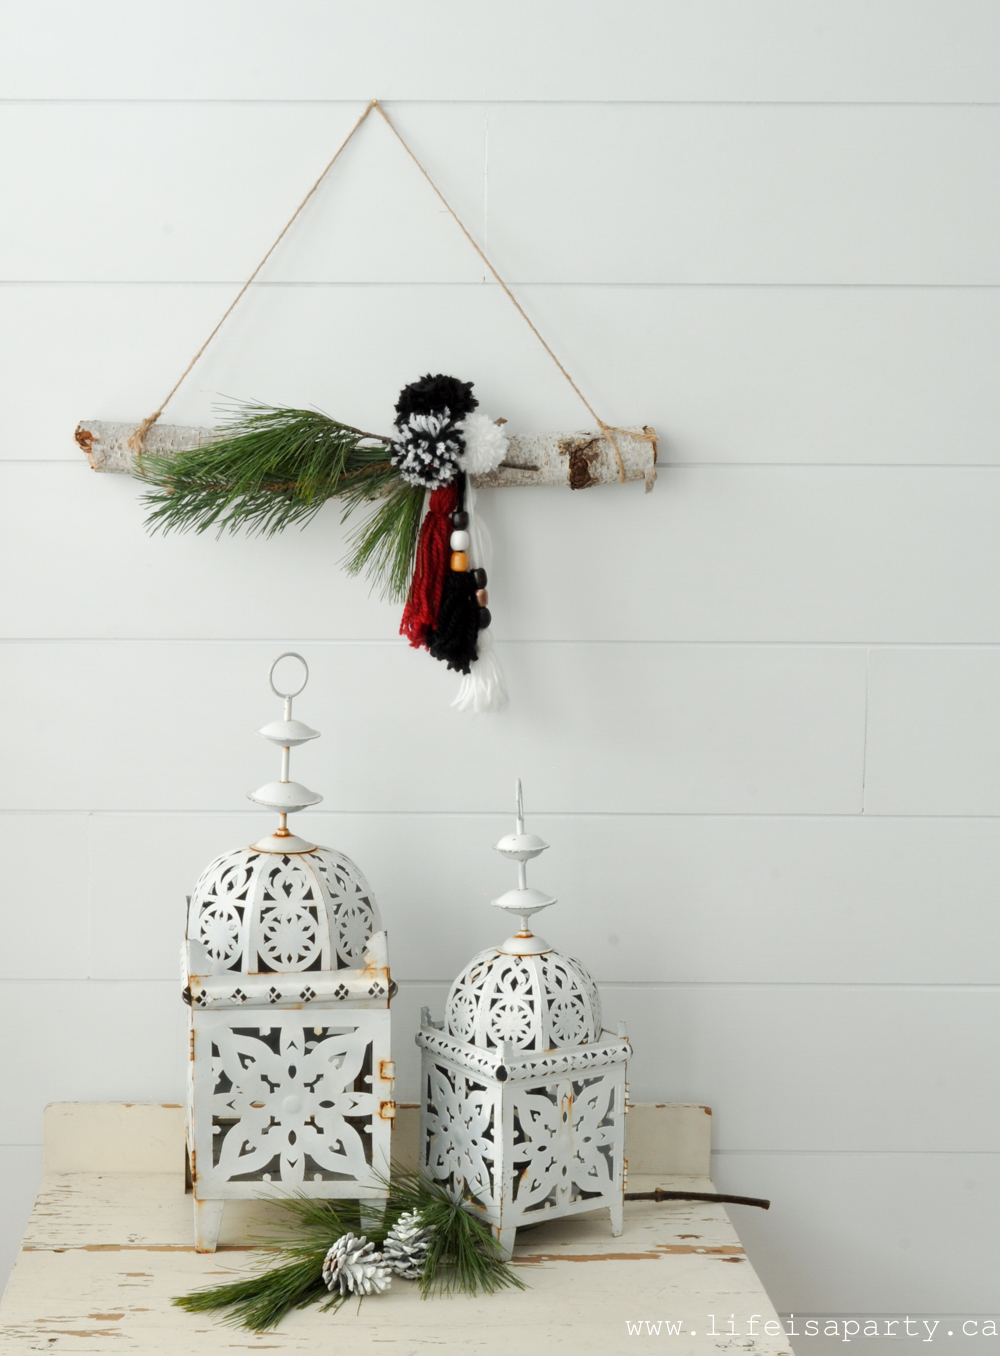 DIY modern boho Christmas wreath with pompoms and tassels with evergreens (via www.lifeisaparty.ca)